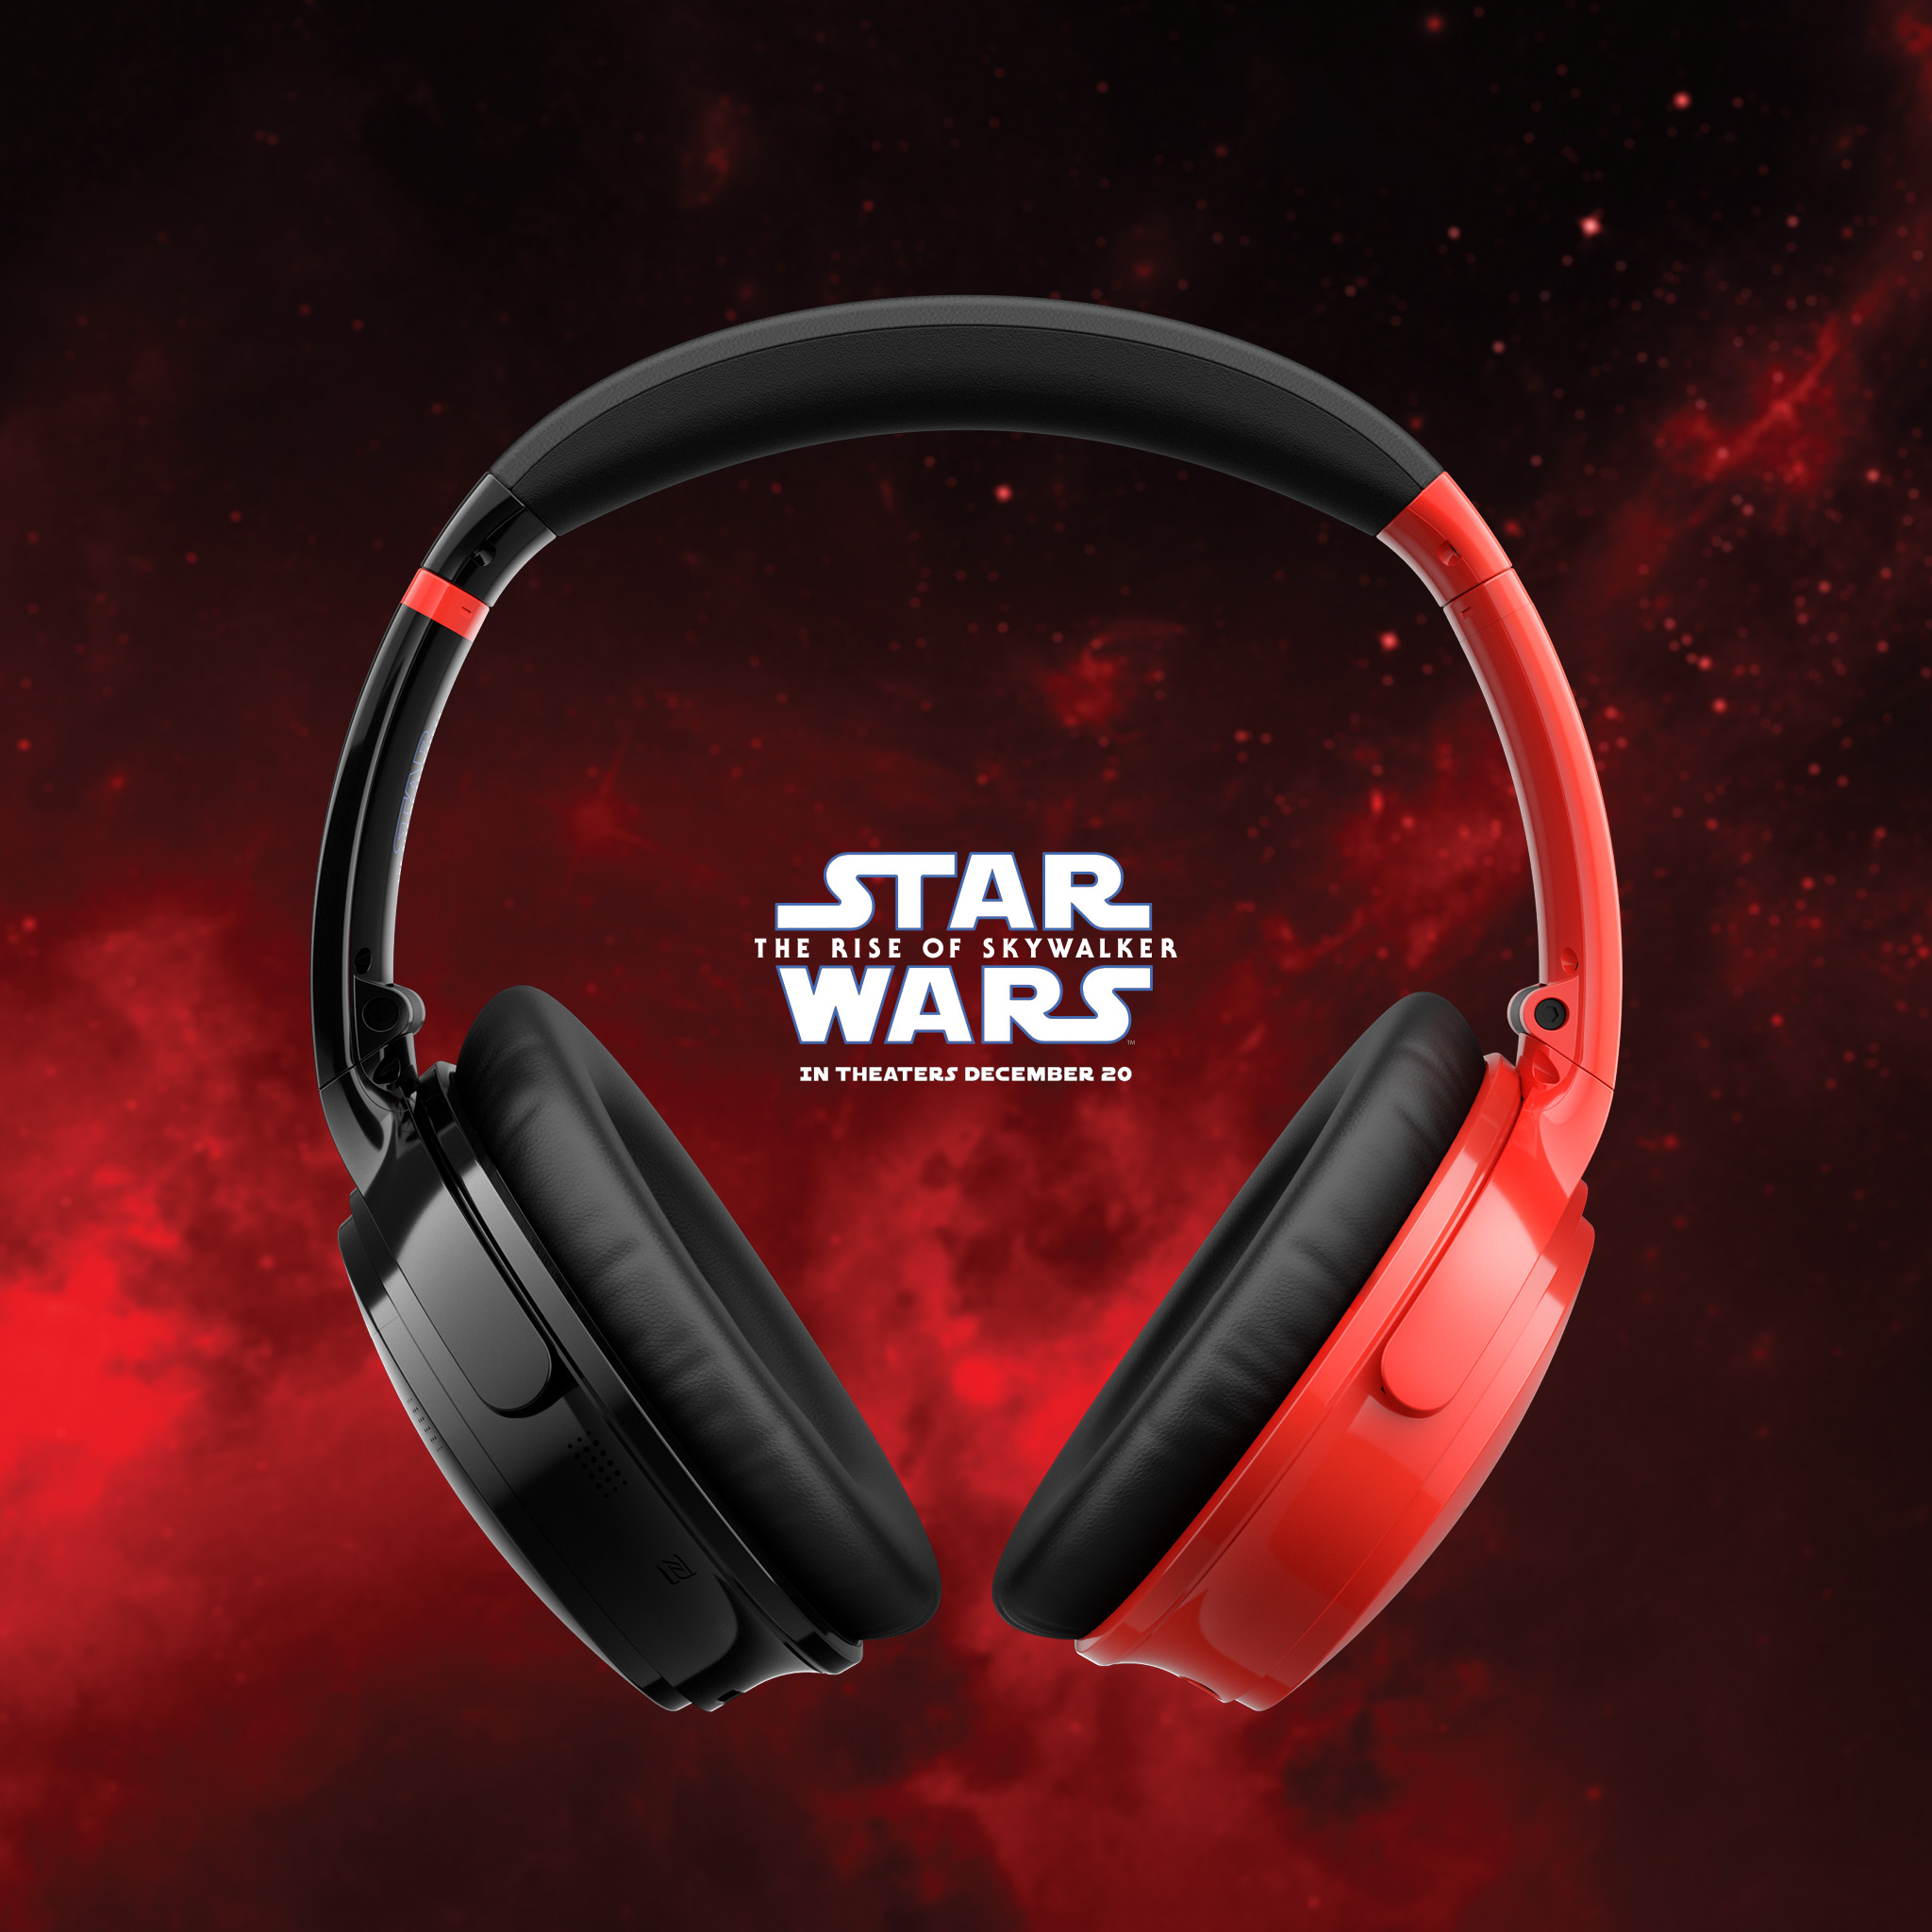 on Twitter: "Looking for gift ideas? Check out the Star Wars #TheRiseOfSkywalker Holiday Gift Guide. You just might find the headphones you're looking for: https://t.co/Dh2Sh2UARp #QC35 II https://t.co/txgOzSs4OX" Twitter